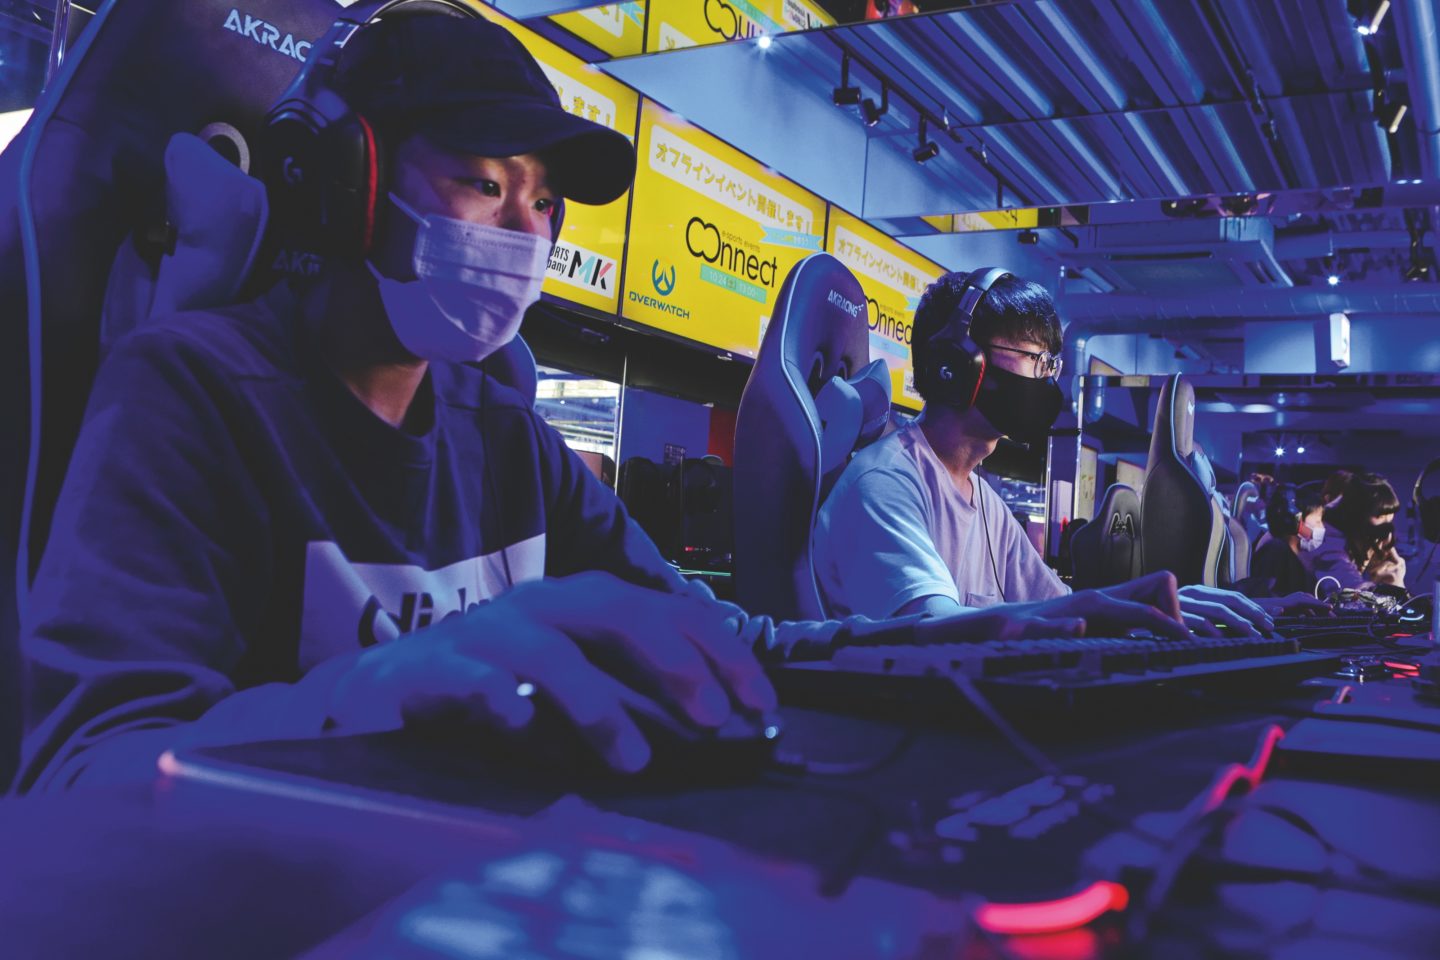 Gamers at Japan's First Dedicated e-Sports gaming Hotel